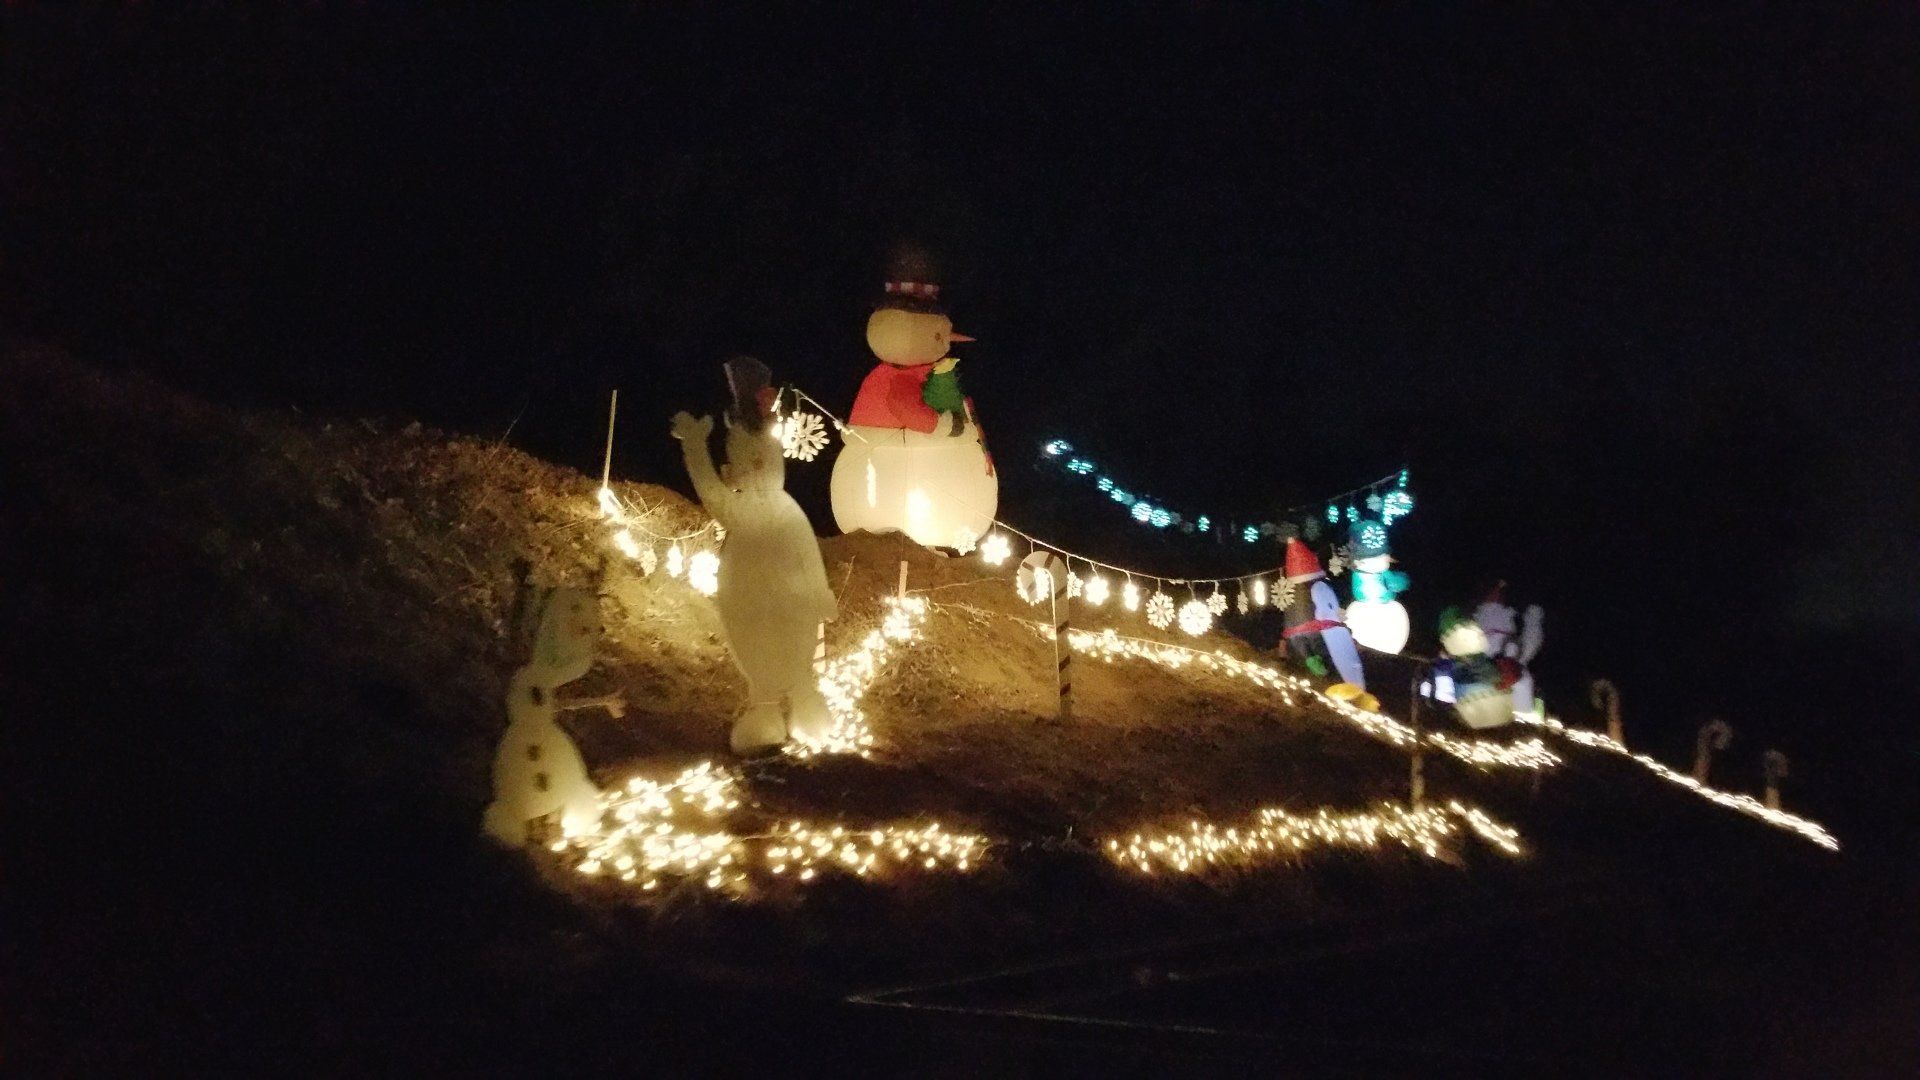 Outdoor Christmas lights 2019 activities in the Inland Empire Lighted Hayride at night. Greenspot Farms Mentone CA